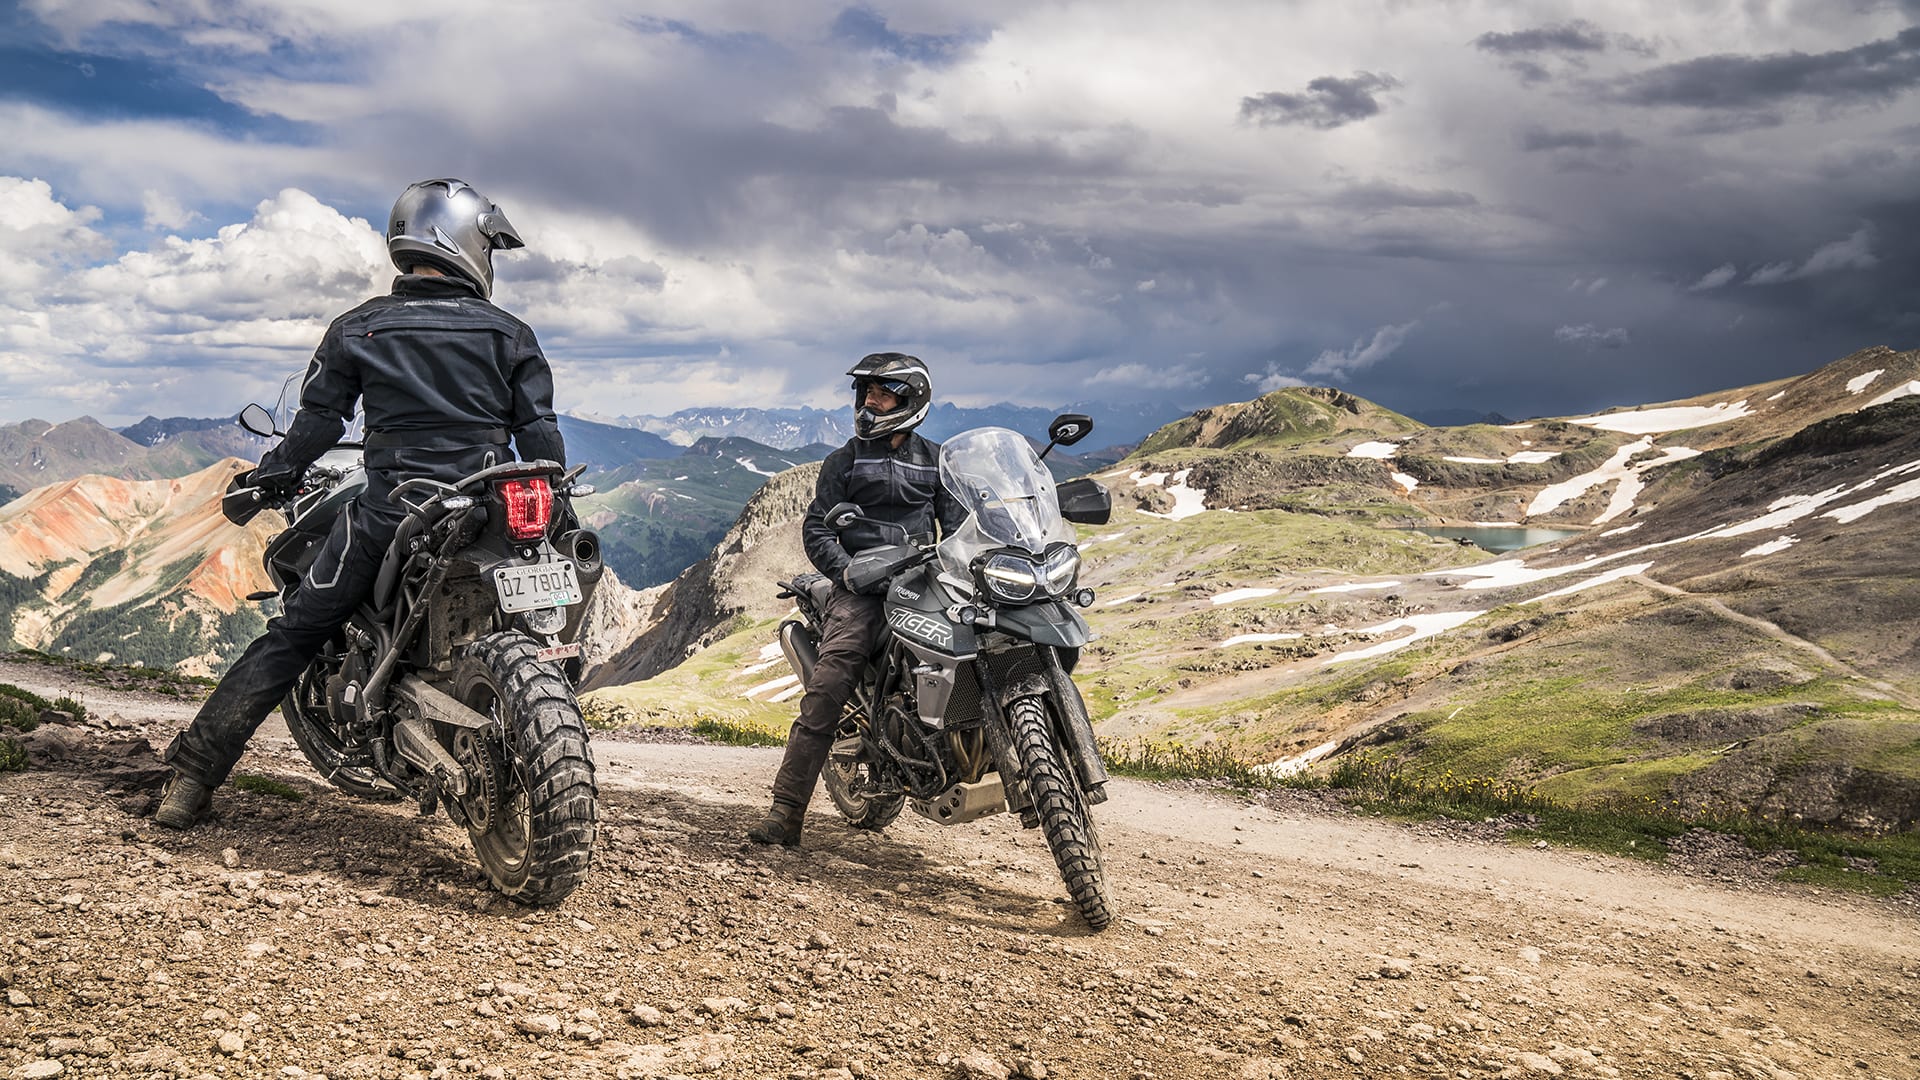 Two riders on Triumph Tiger 800s riding in mountainous scenery on gravel roads